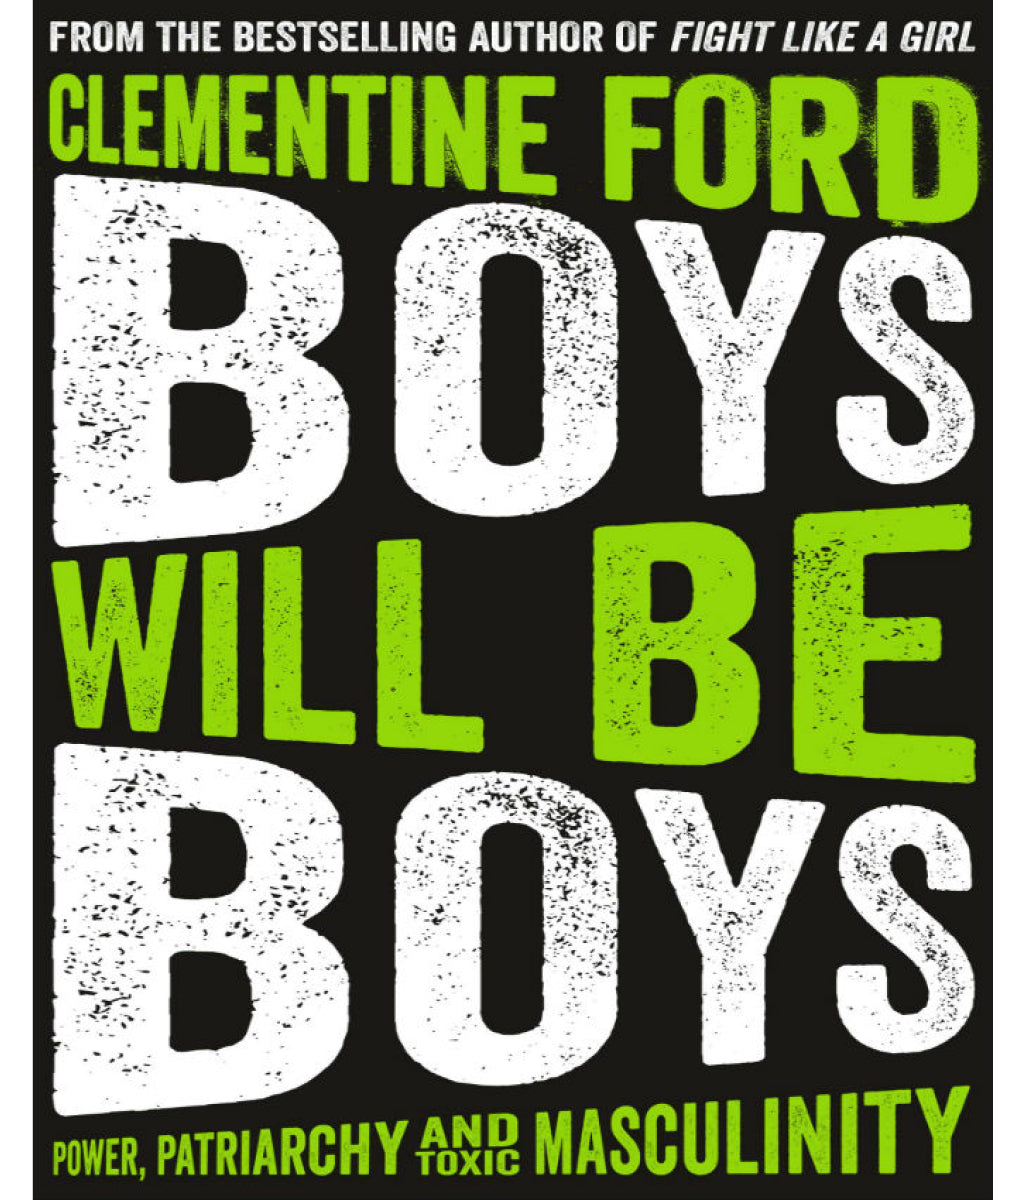 Boys Will Be Boys: Power, Patriarchy and Toxic Masculinity Clementine Ford